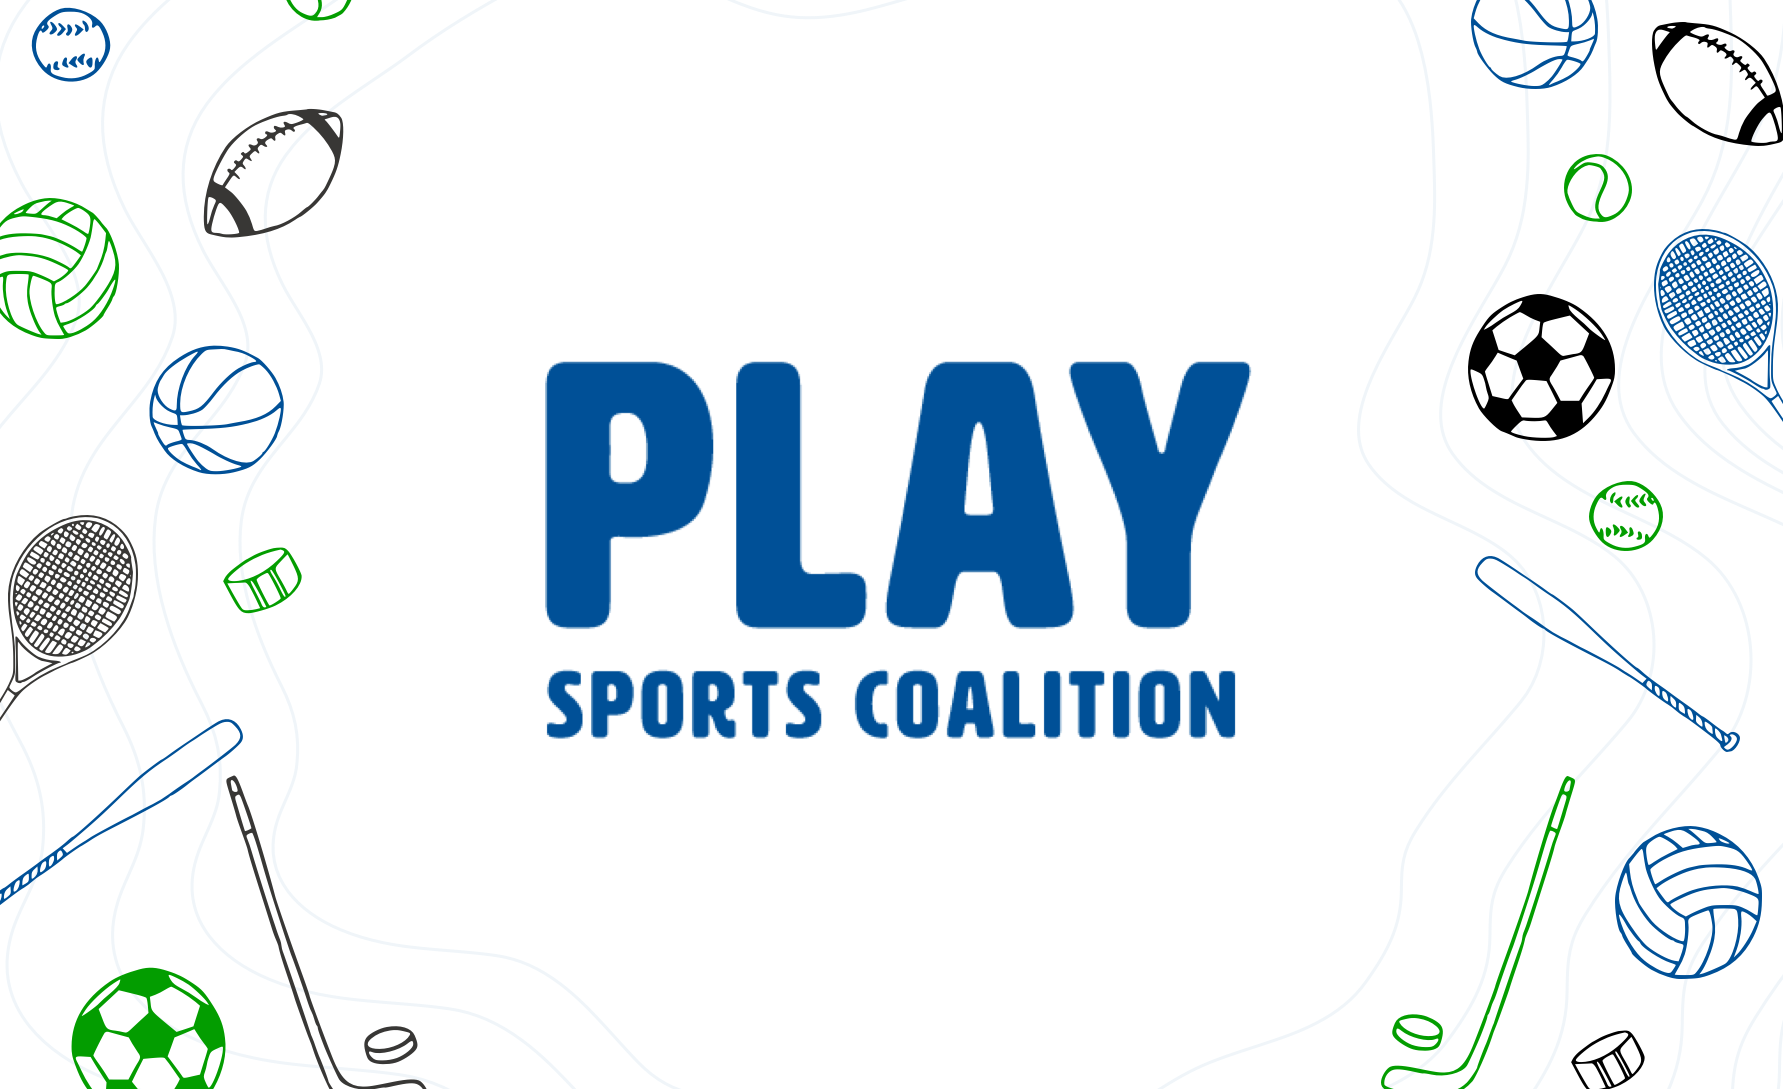 Unite 2 Play - Home - PLAY Sports Coalition